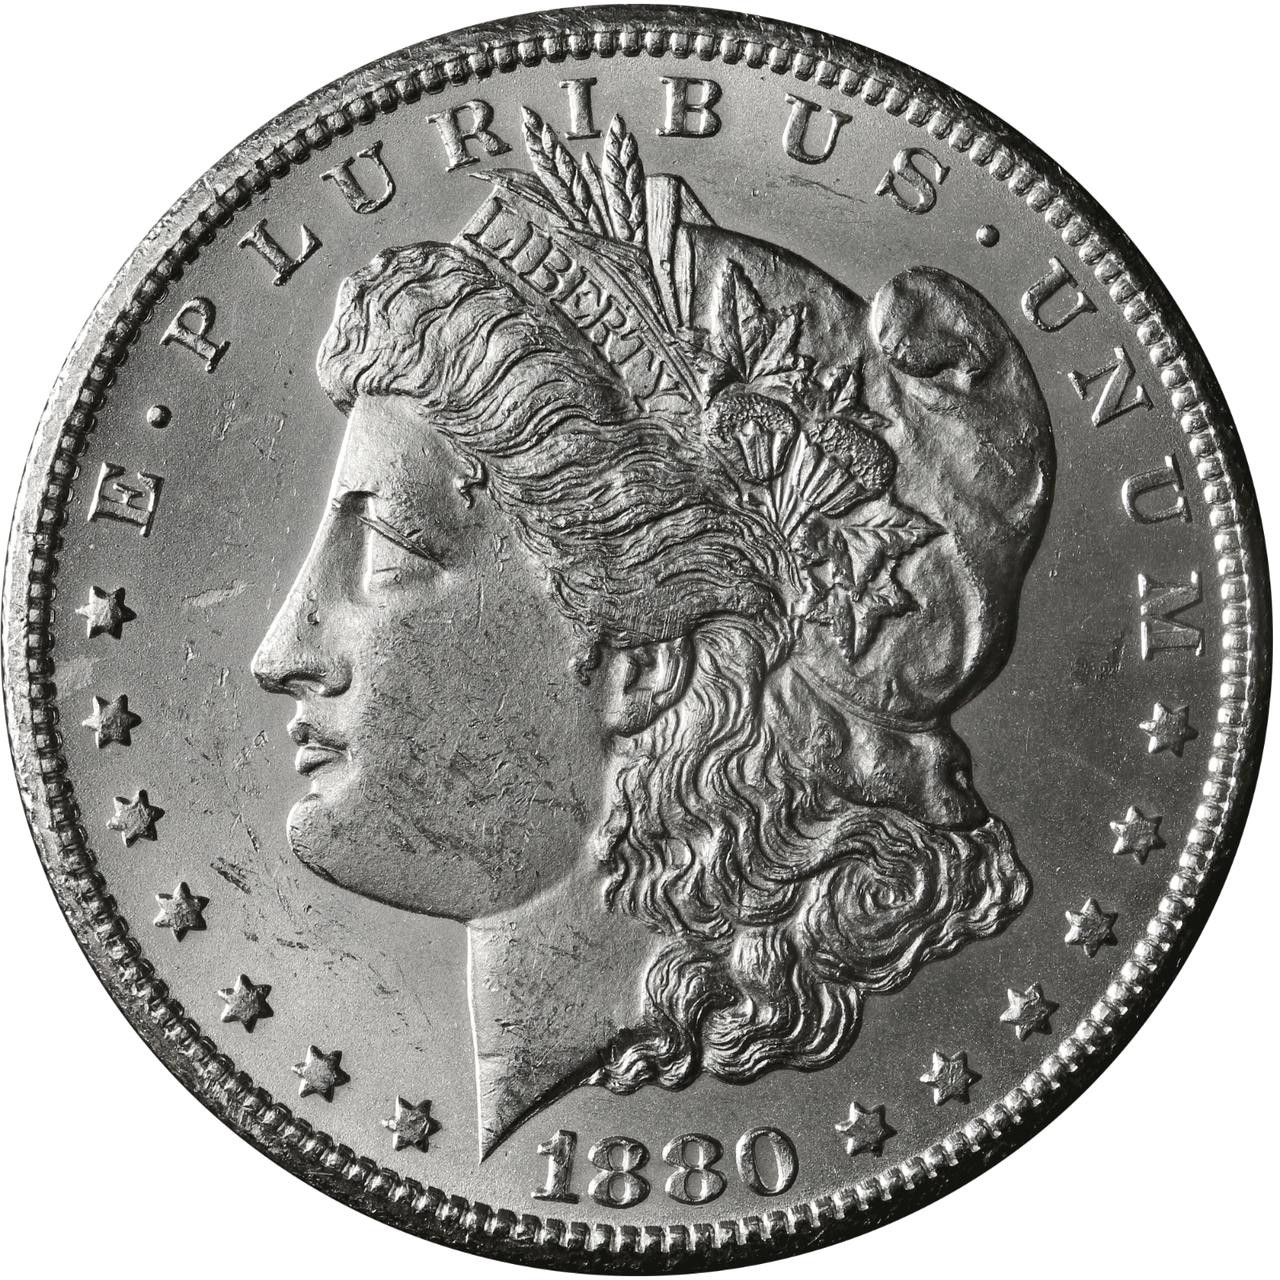 THESE SILVER MORGAN DOLLAR COINS ARE WORTH A LOT OF MONEY!! 1880 MORGAN  DOLLAR VALUE 